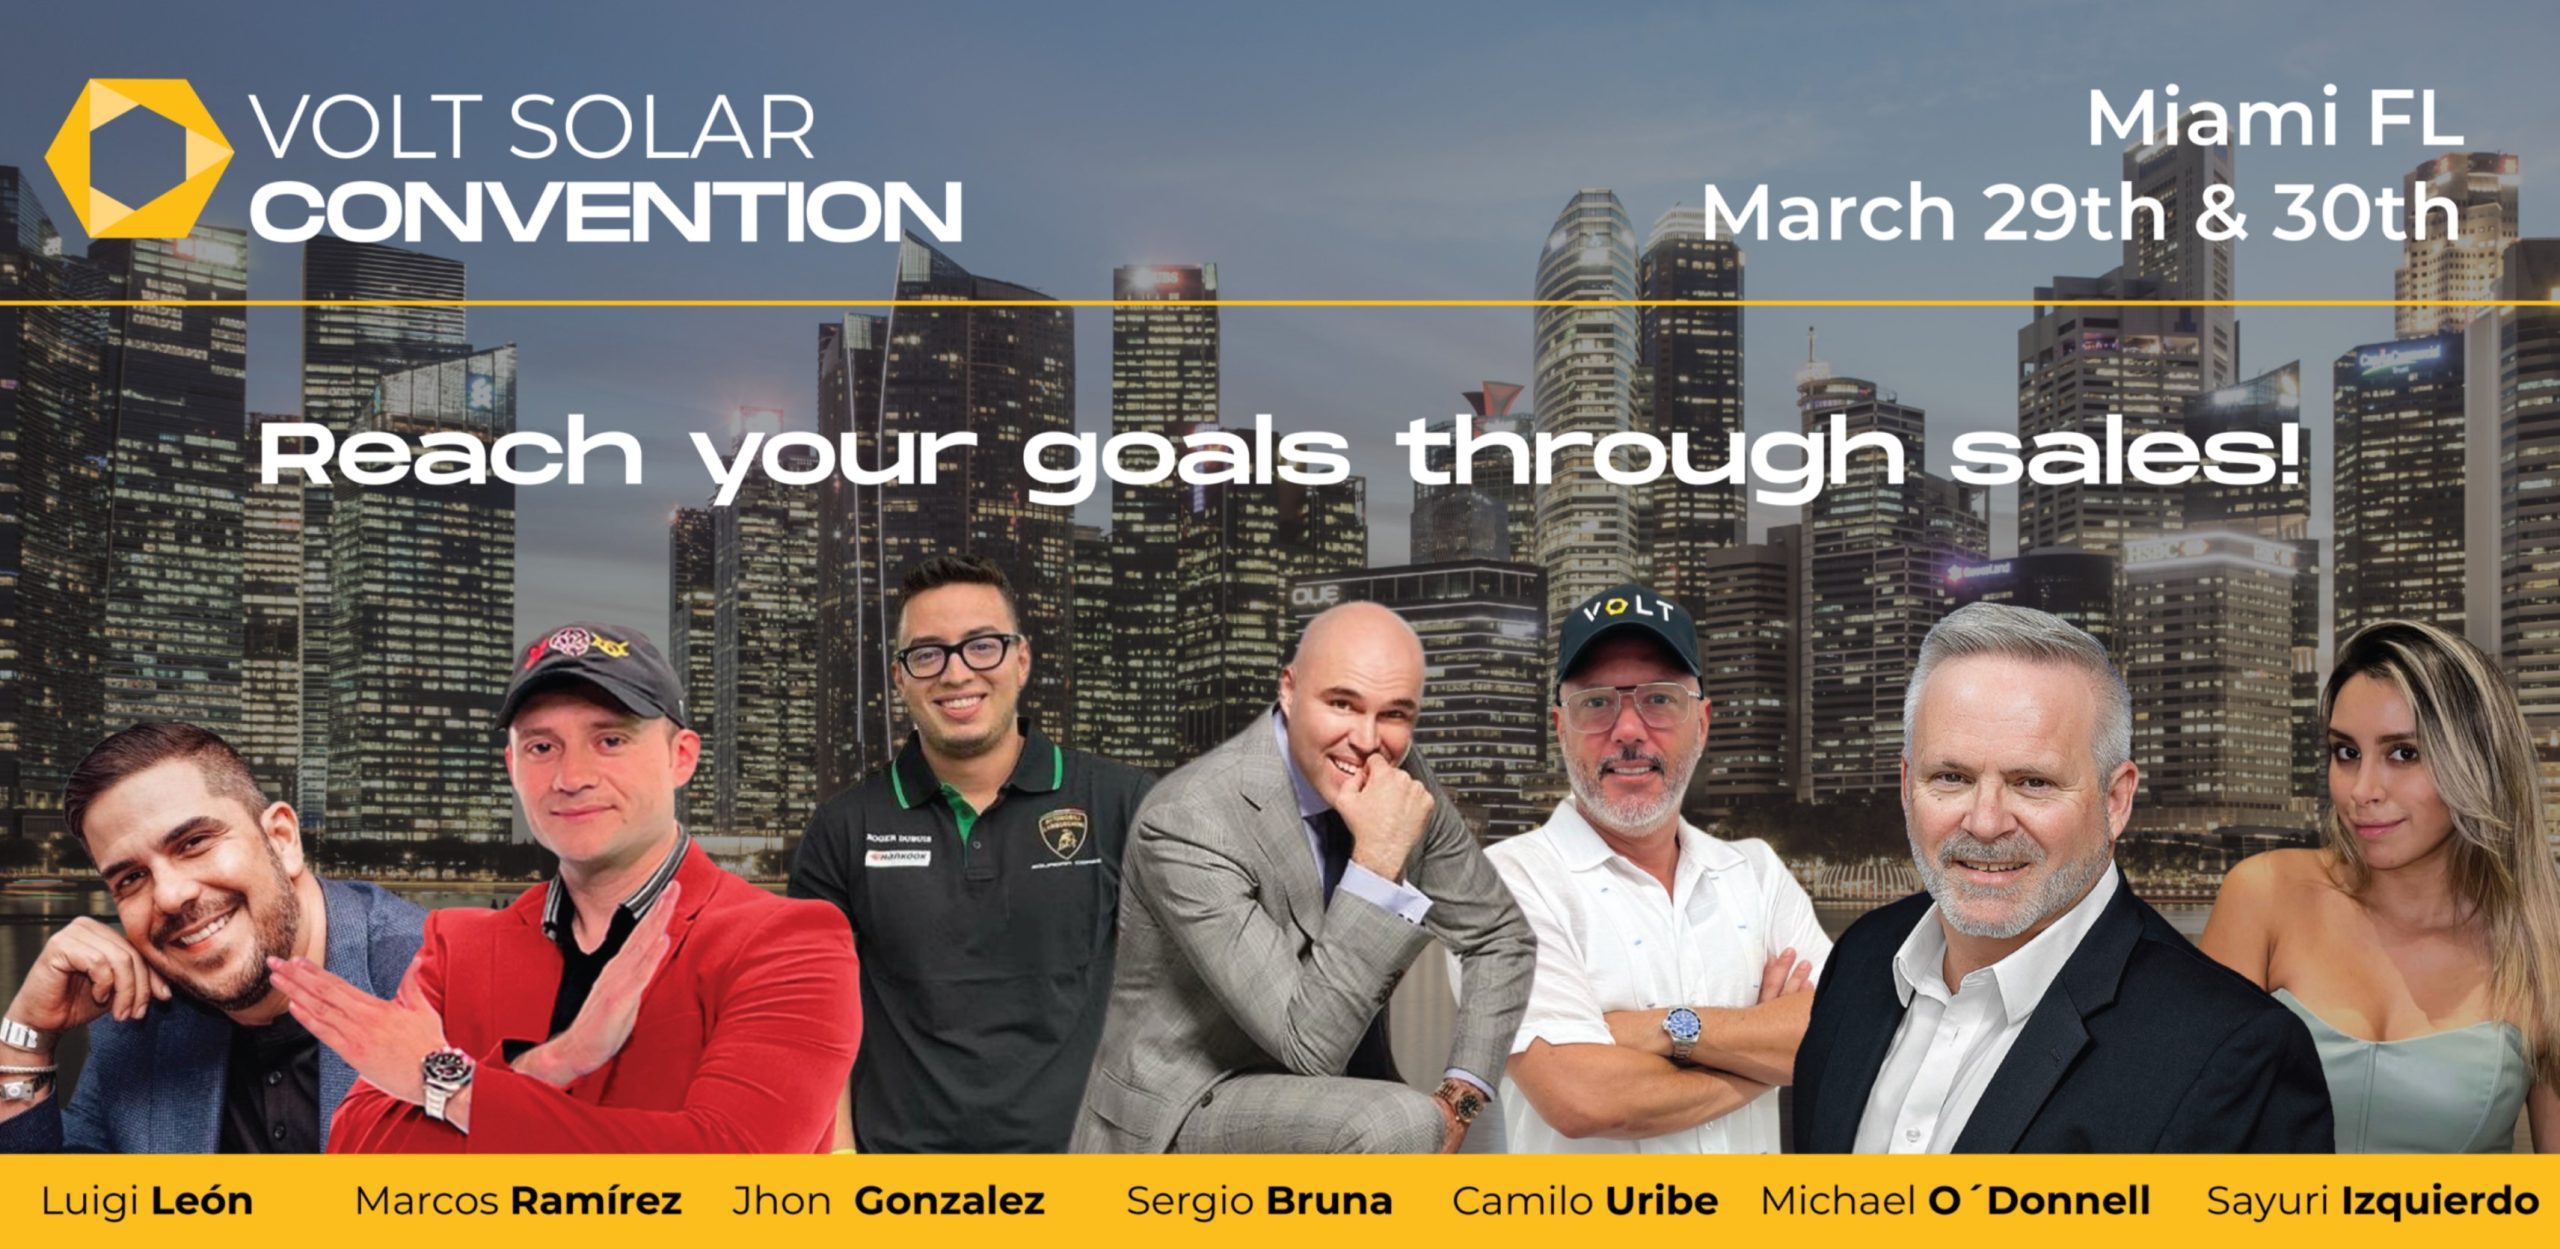 Join us at the Volt Solar Convention and empower your sales success